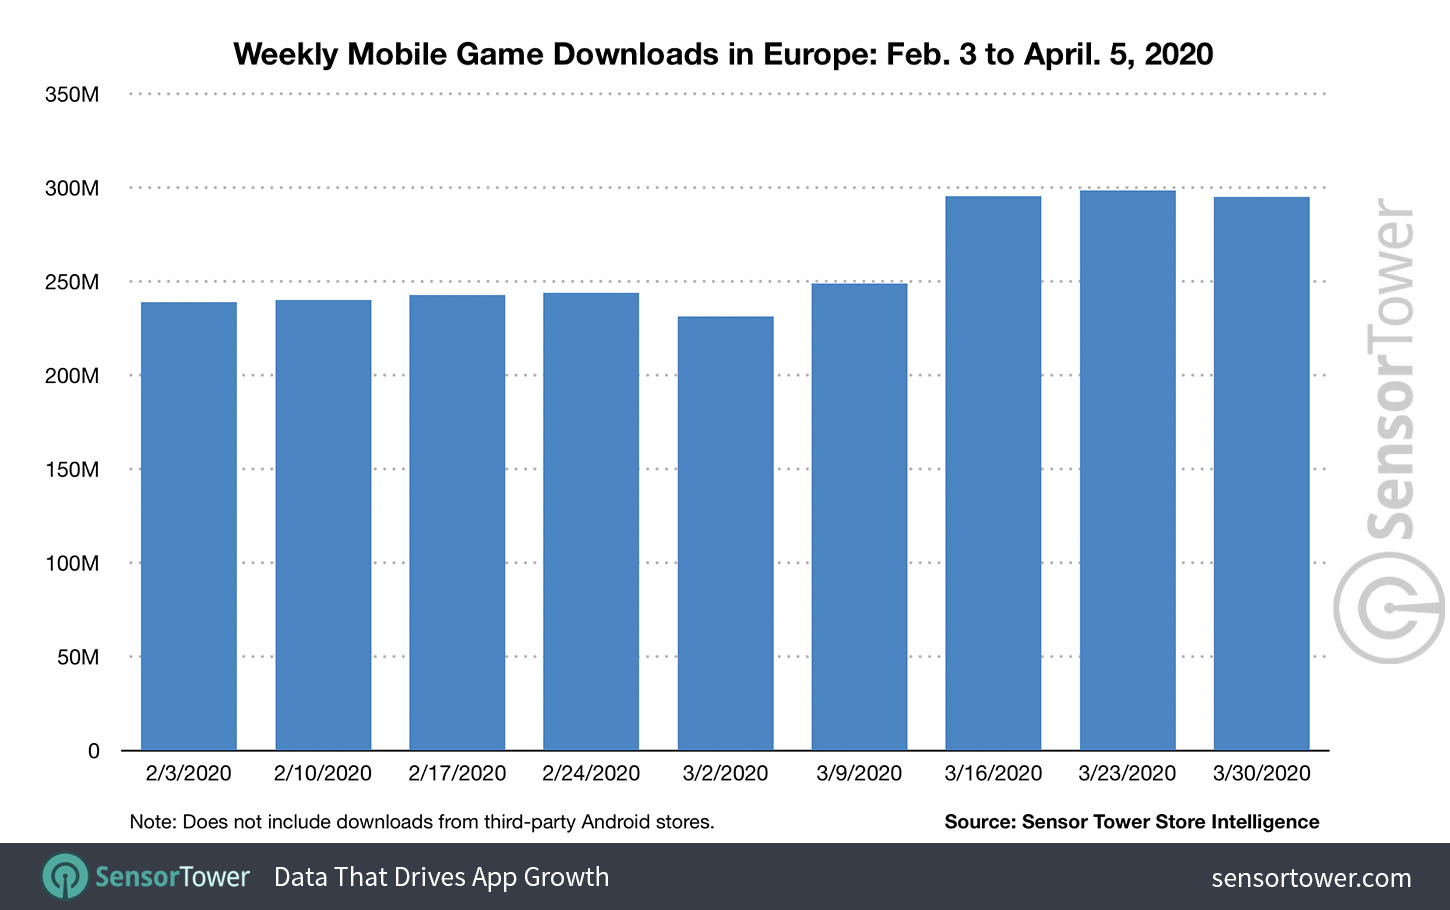 Weekly Mobile Games downloads in Europe from February 3 to April 5 2020